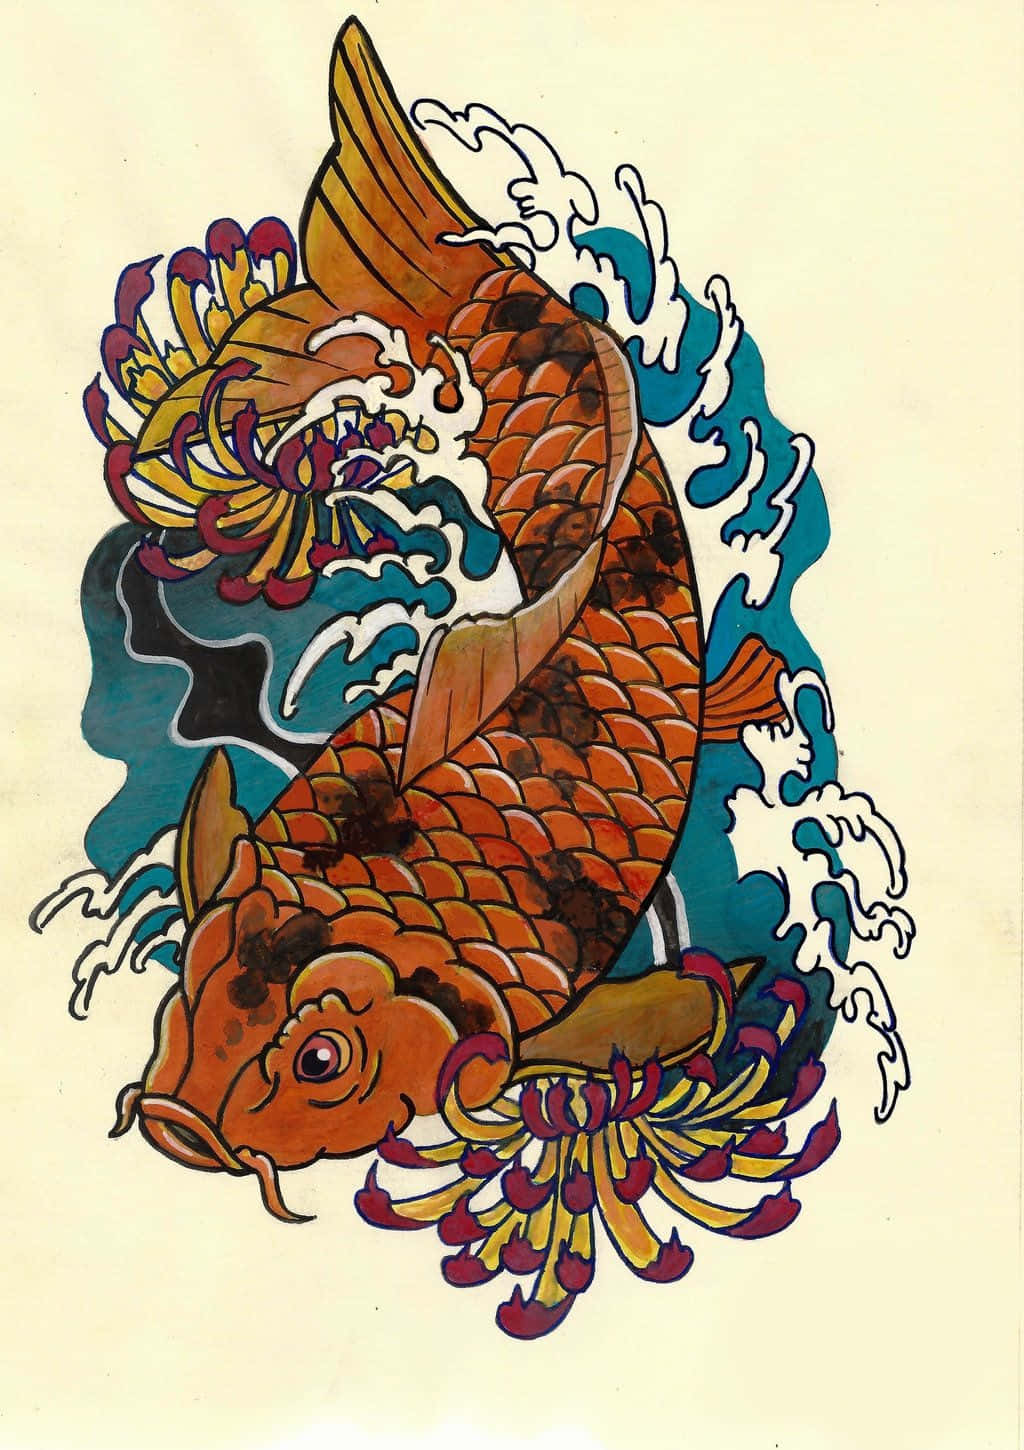 A Koi Fish Tattoo Design On A Piece Of Paper